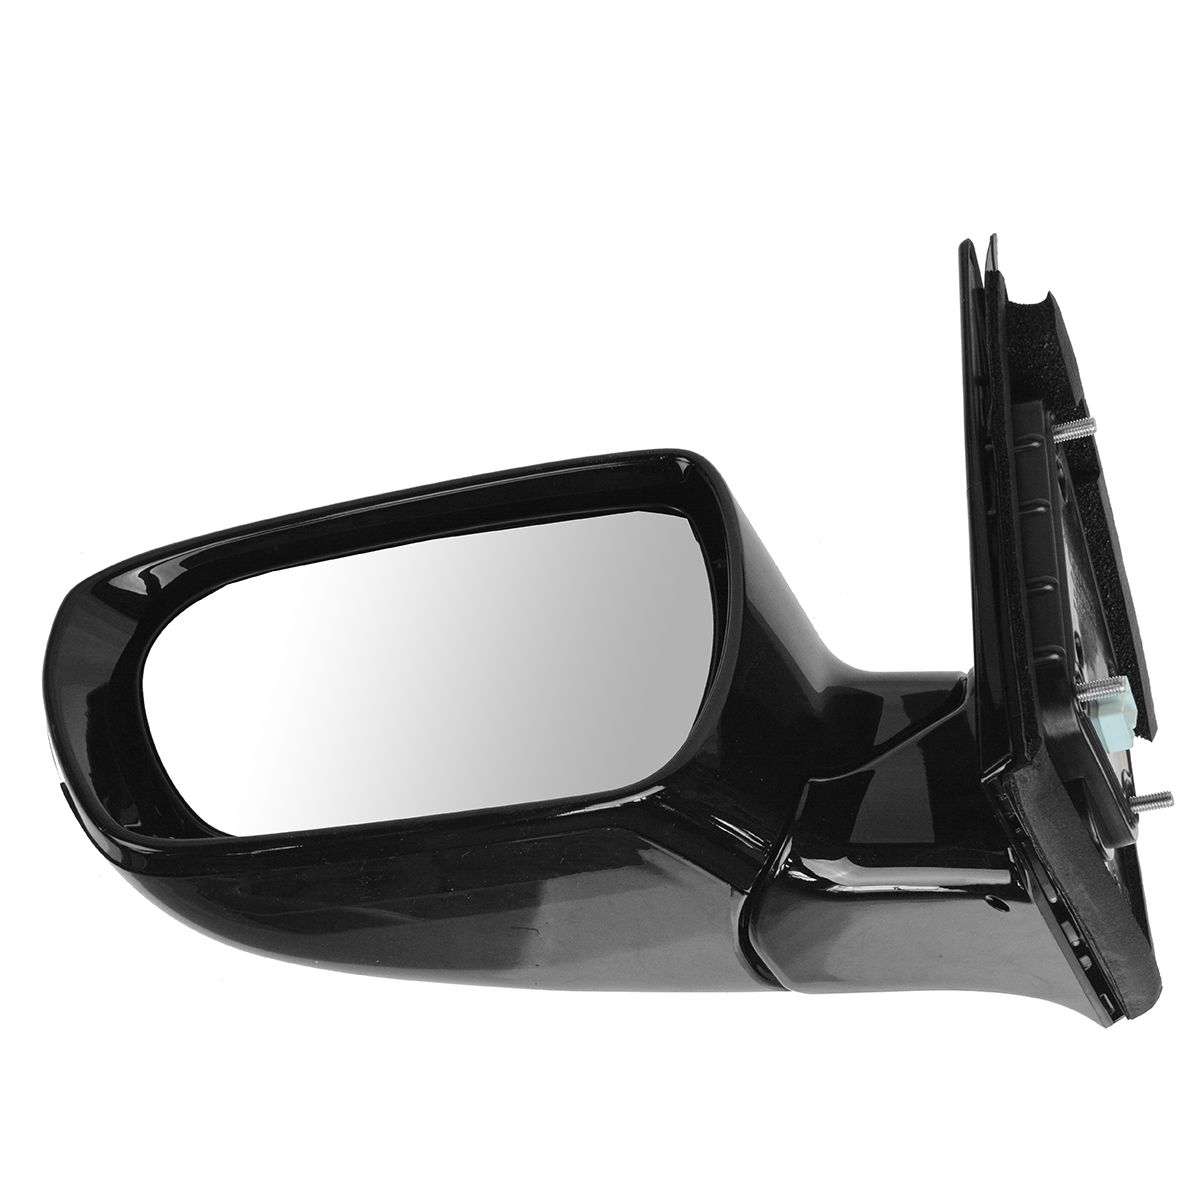 Power Mirror LH Left Driver Side for Santa Fe Sport New | eBay 2018 Hyundai Santa Fe Sport Driver Side Mirror Replacement